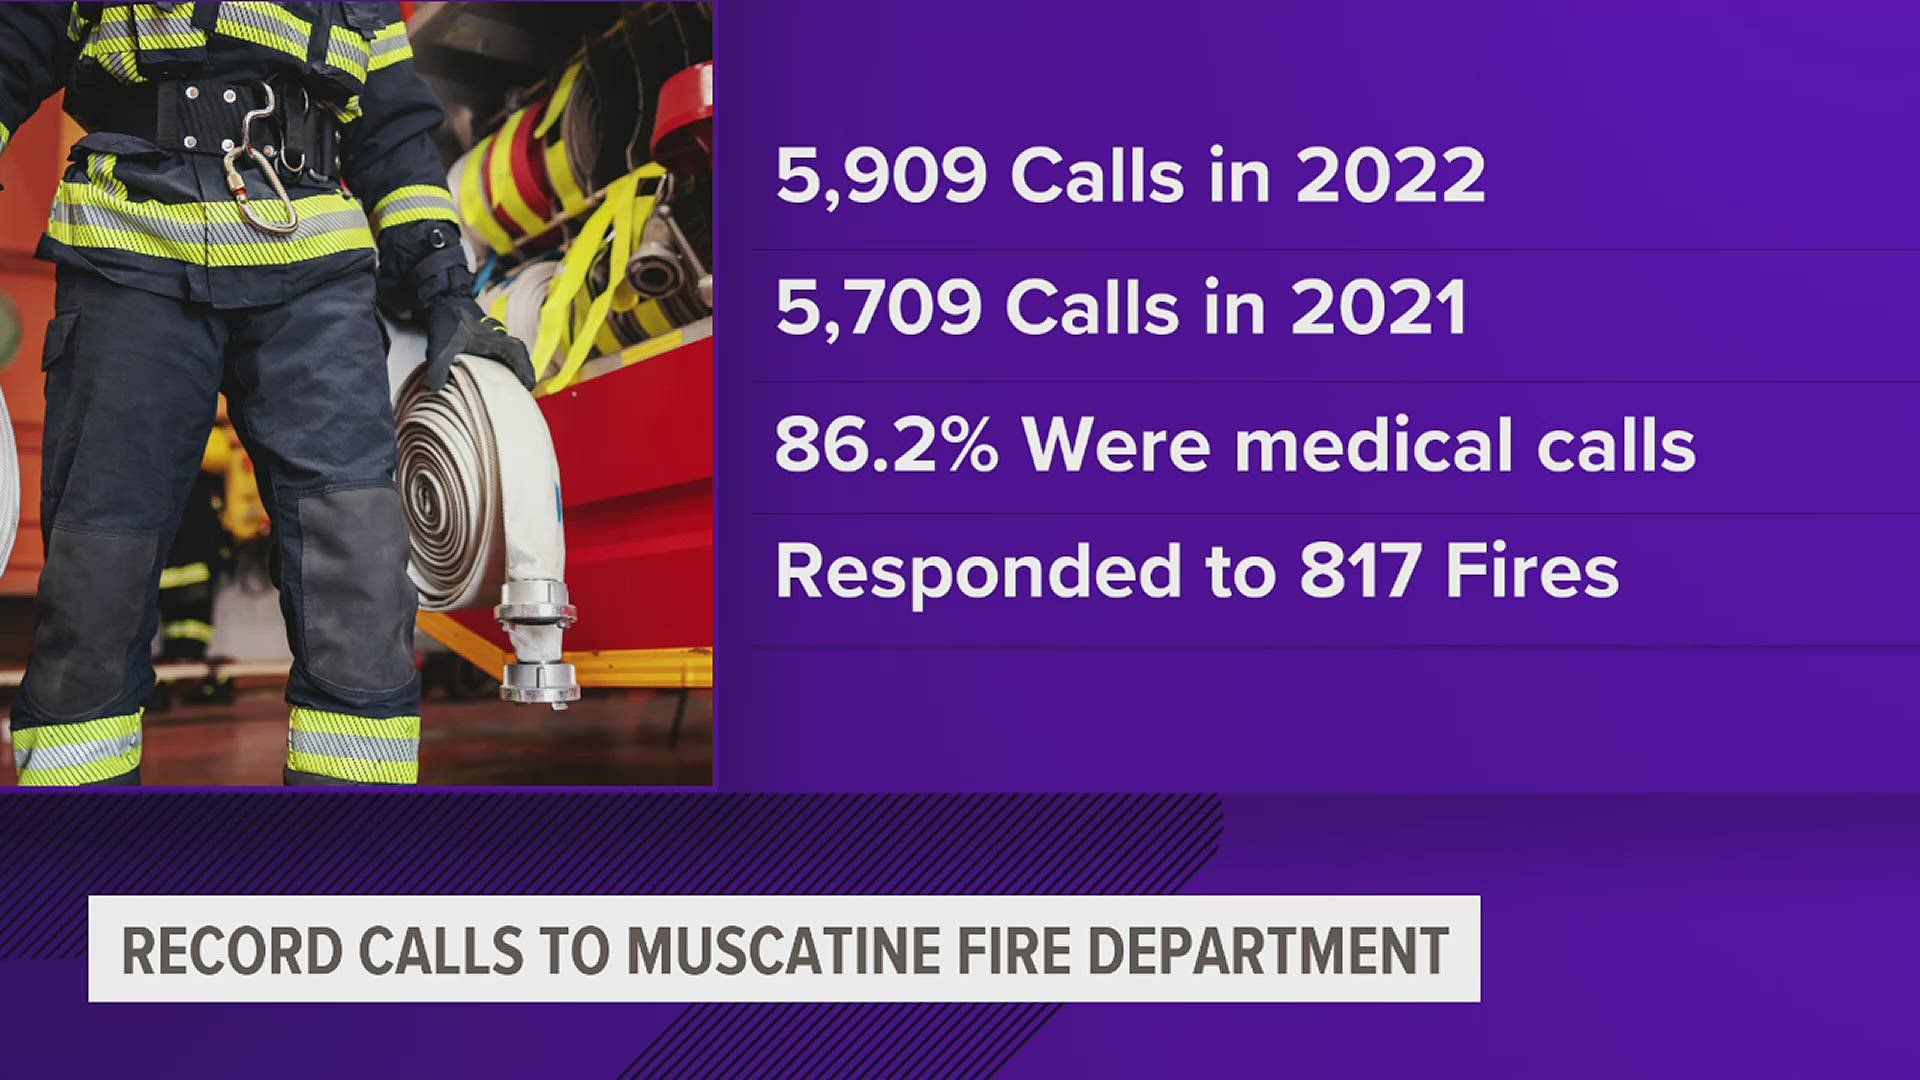 It was a record-setting year for the Muscatine Fire Department, but not in a good way.